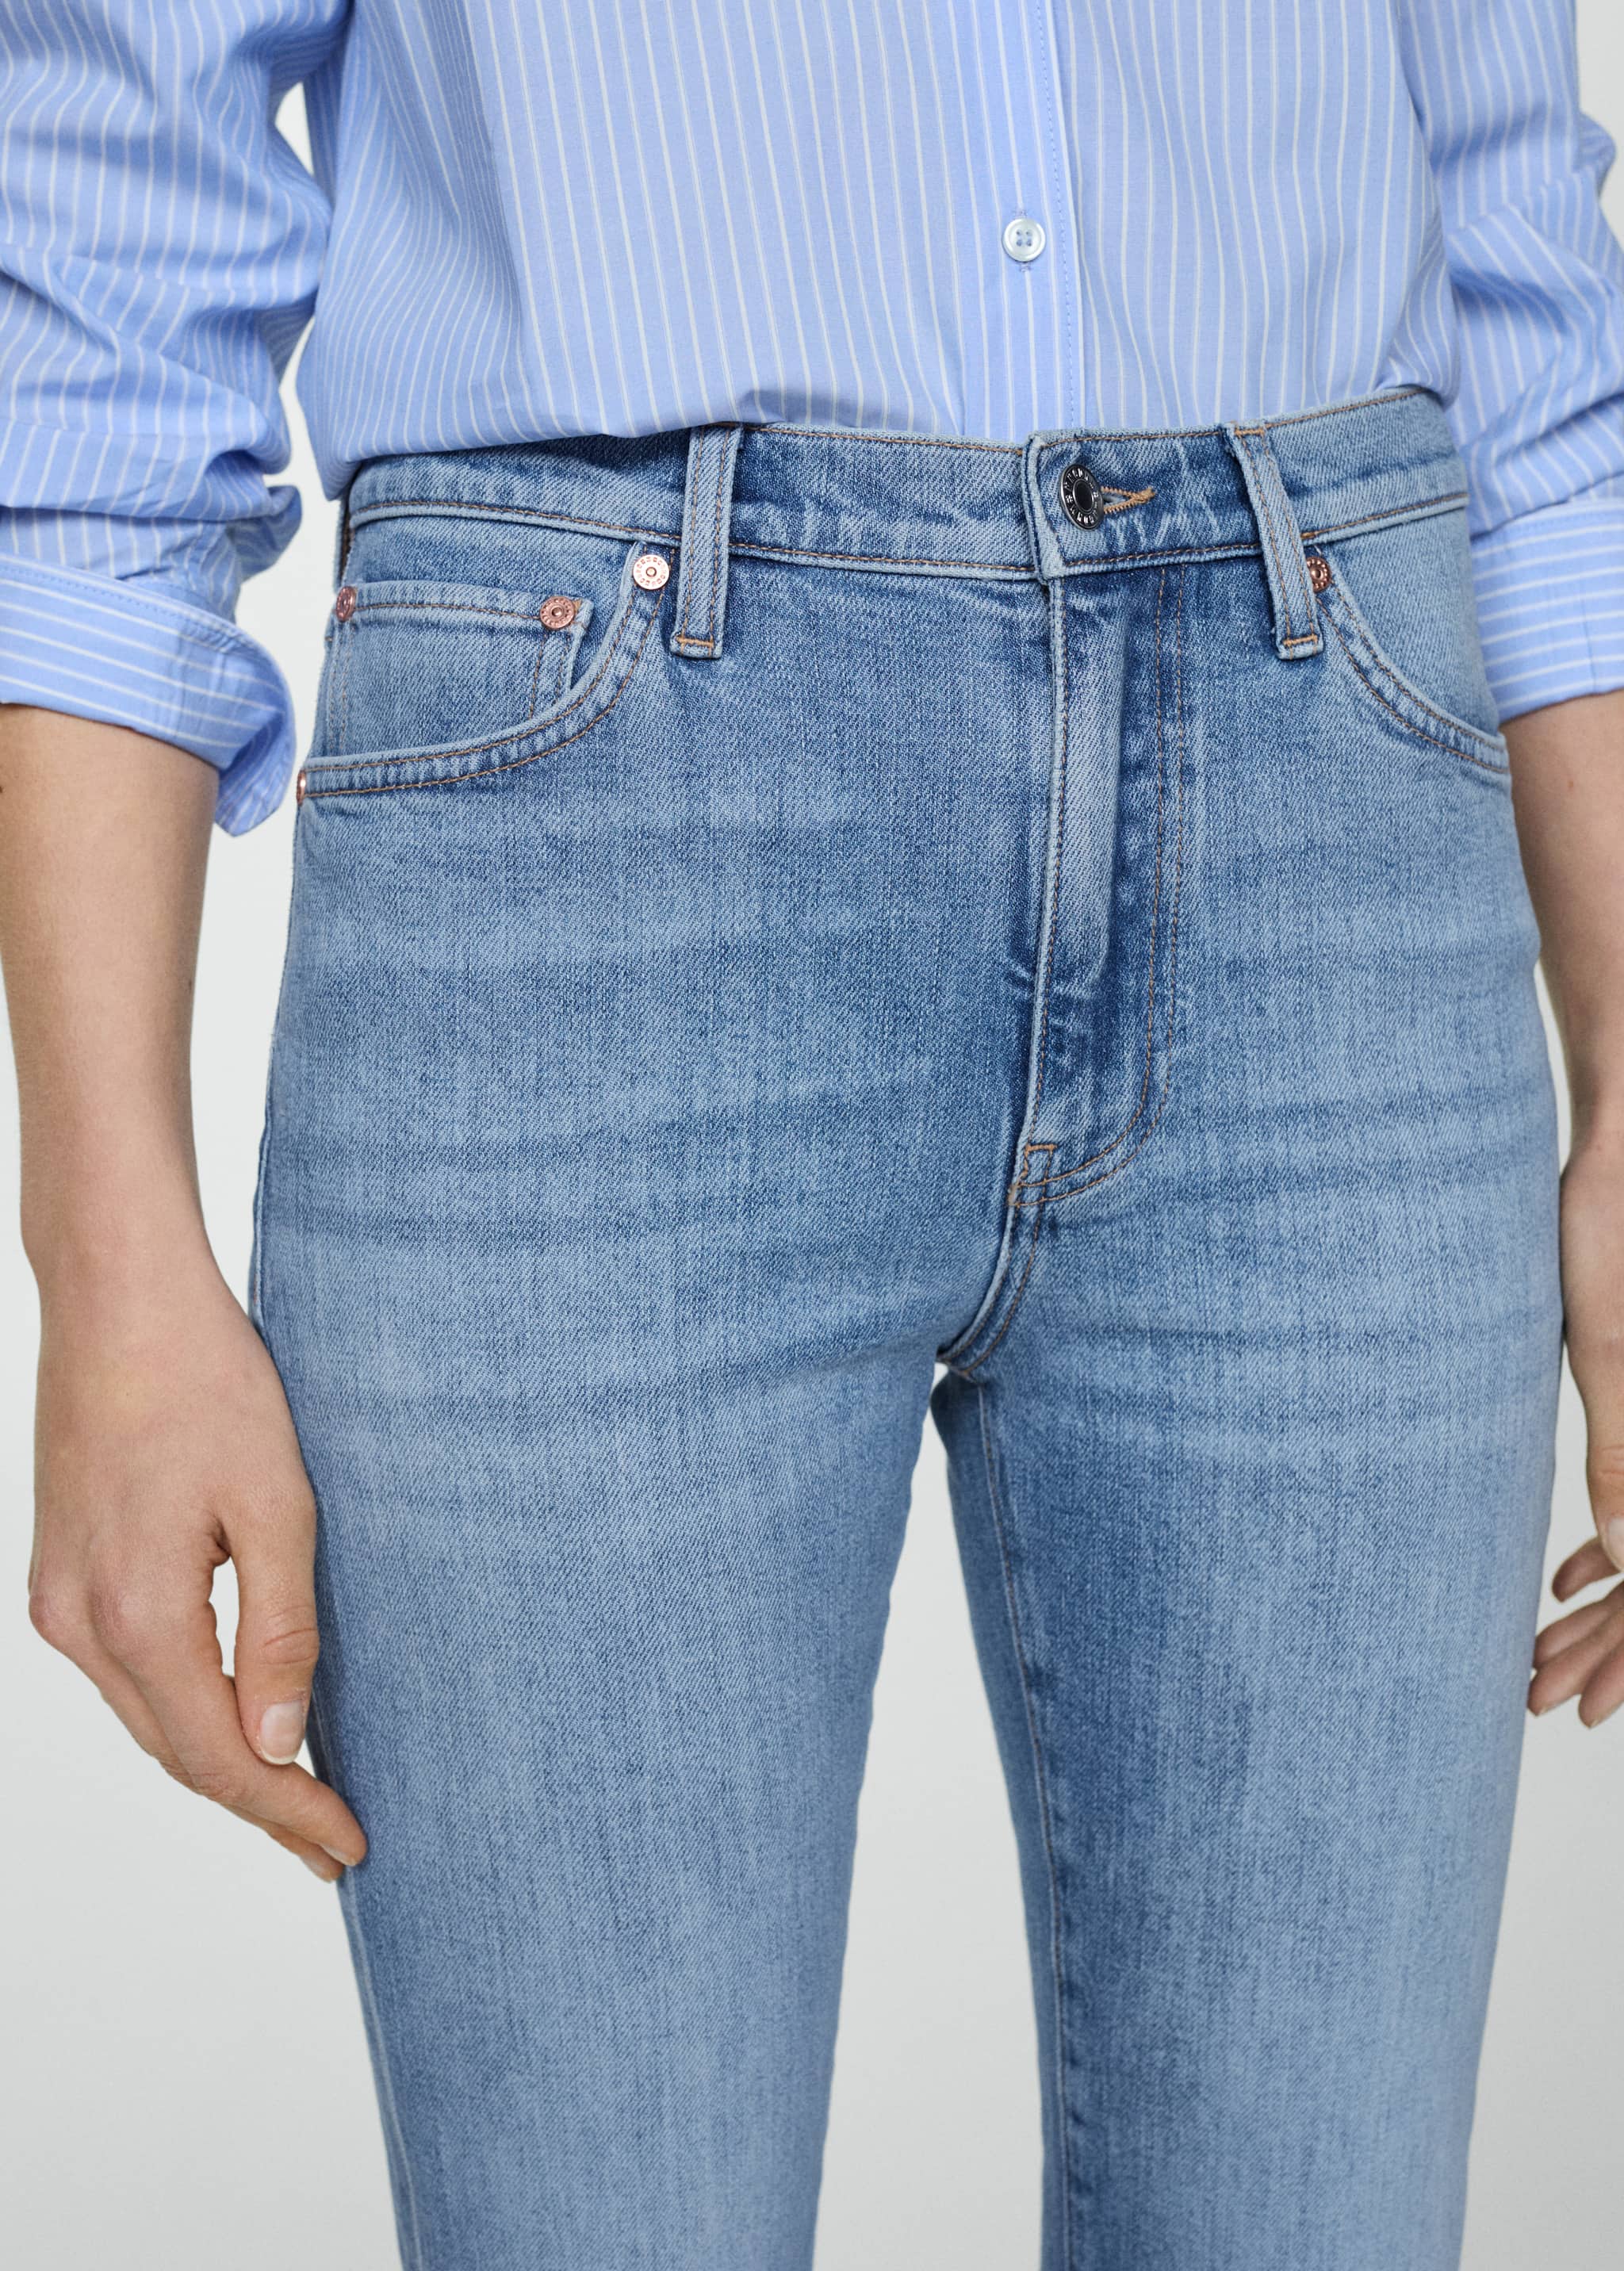 Slim cropped jeans - Details of the article 6